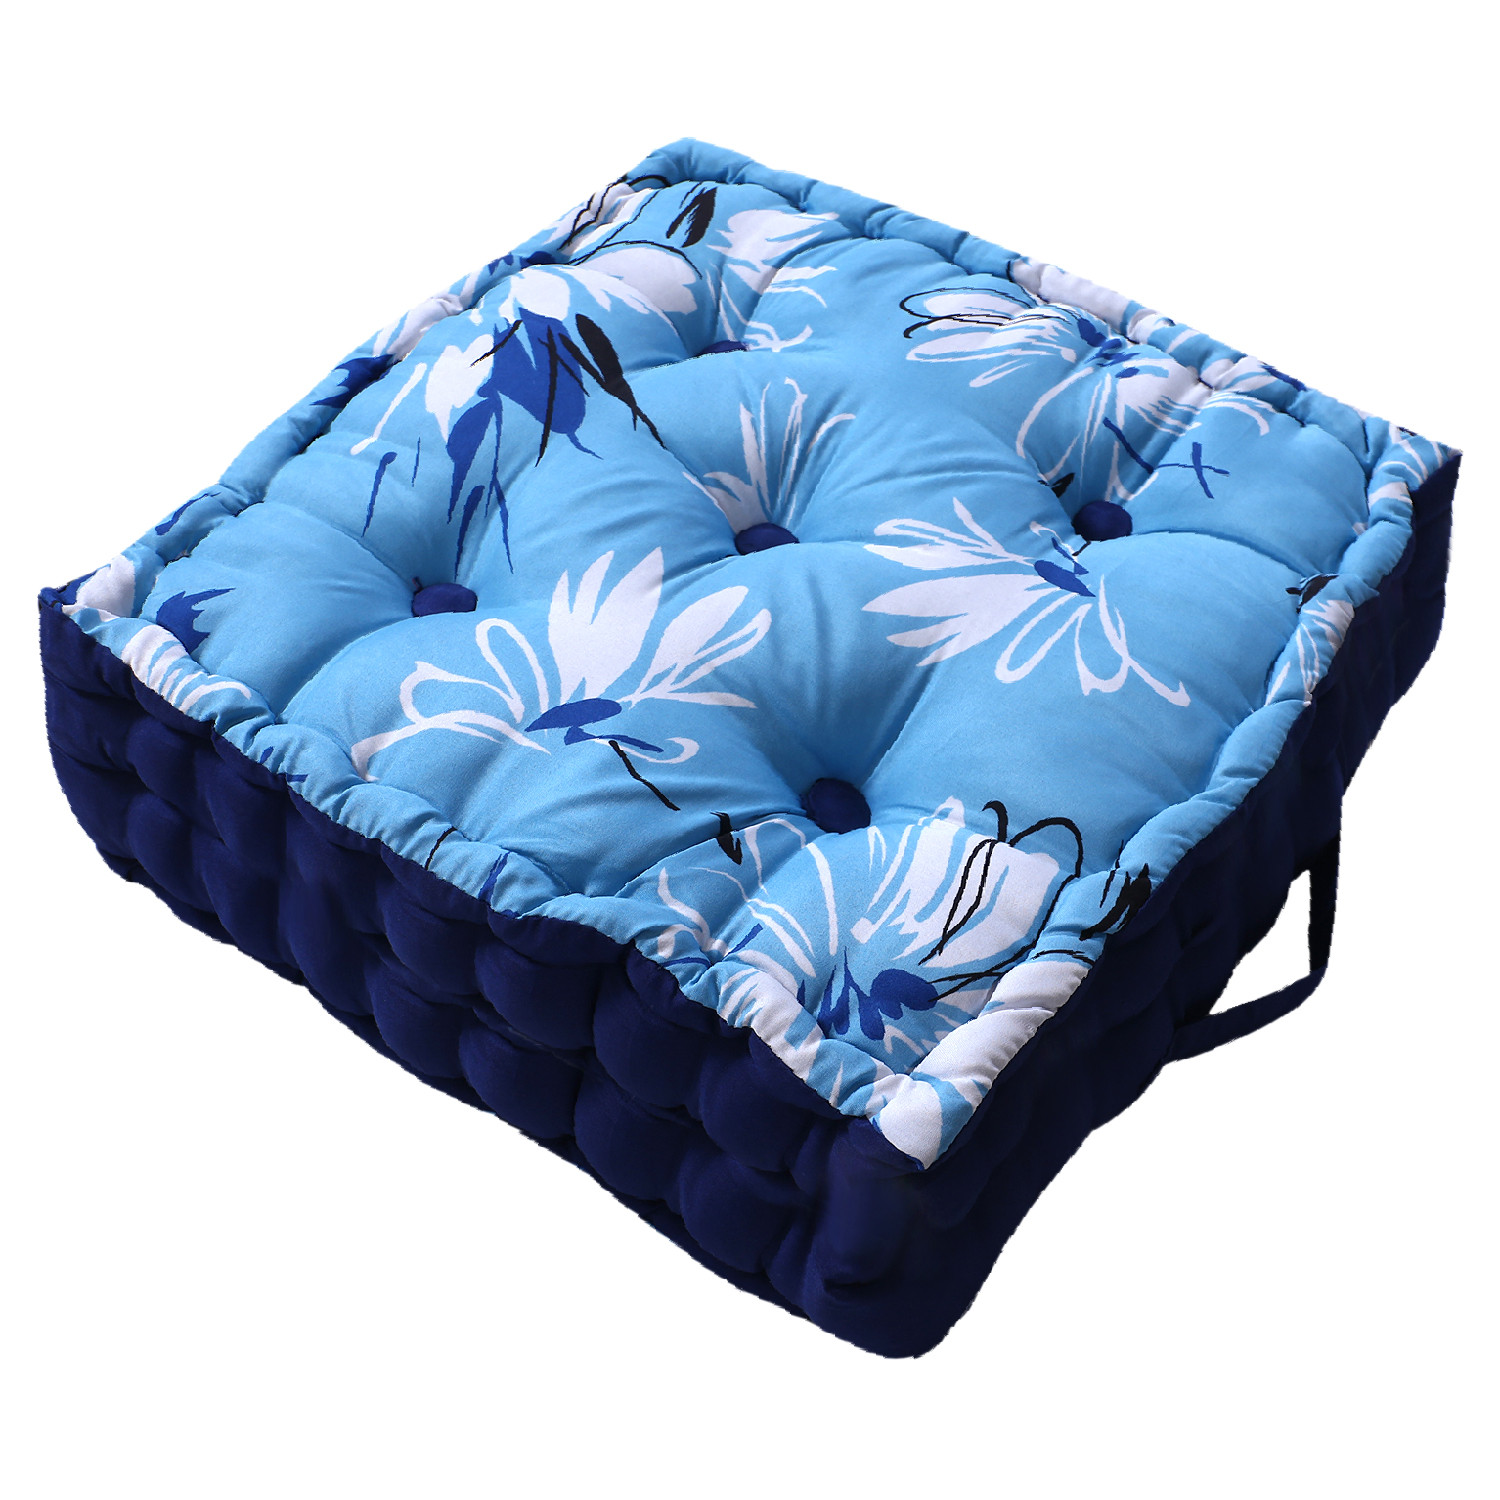 Kuber Industries Square Chair Pad|Comfortable Floral Design Seat Cushion|Soft Cotton Pillow Filler for Seating,Meditation,Yoga,Living Room (Sky Blue)